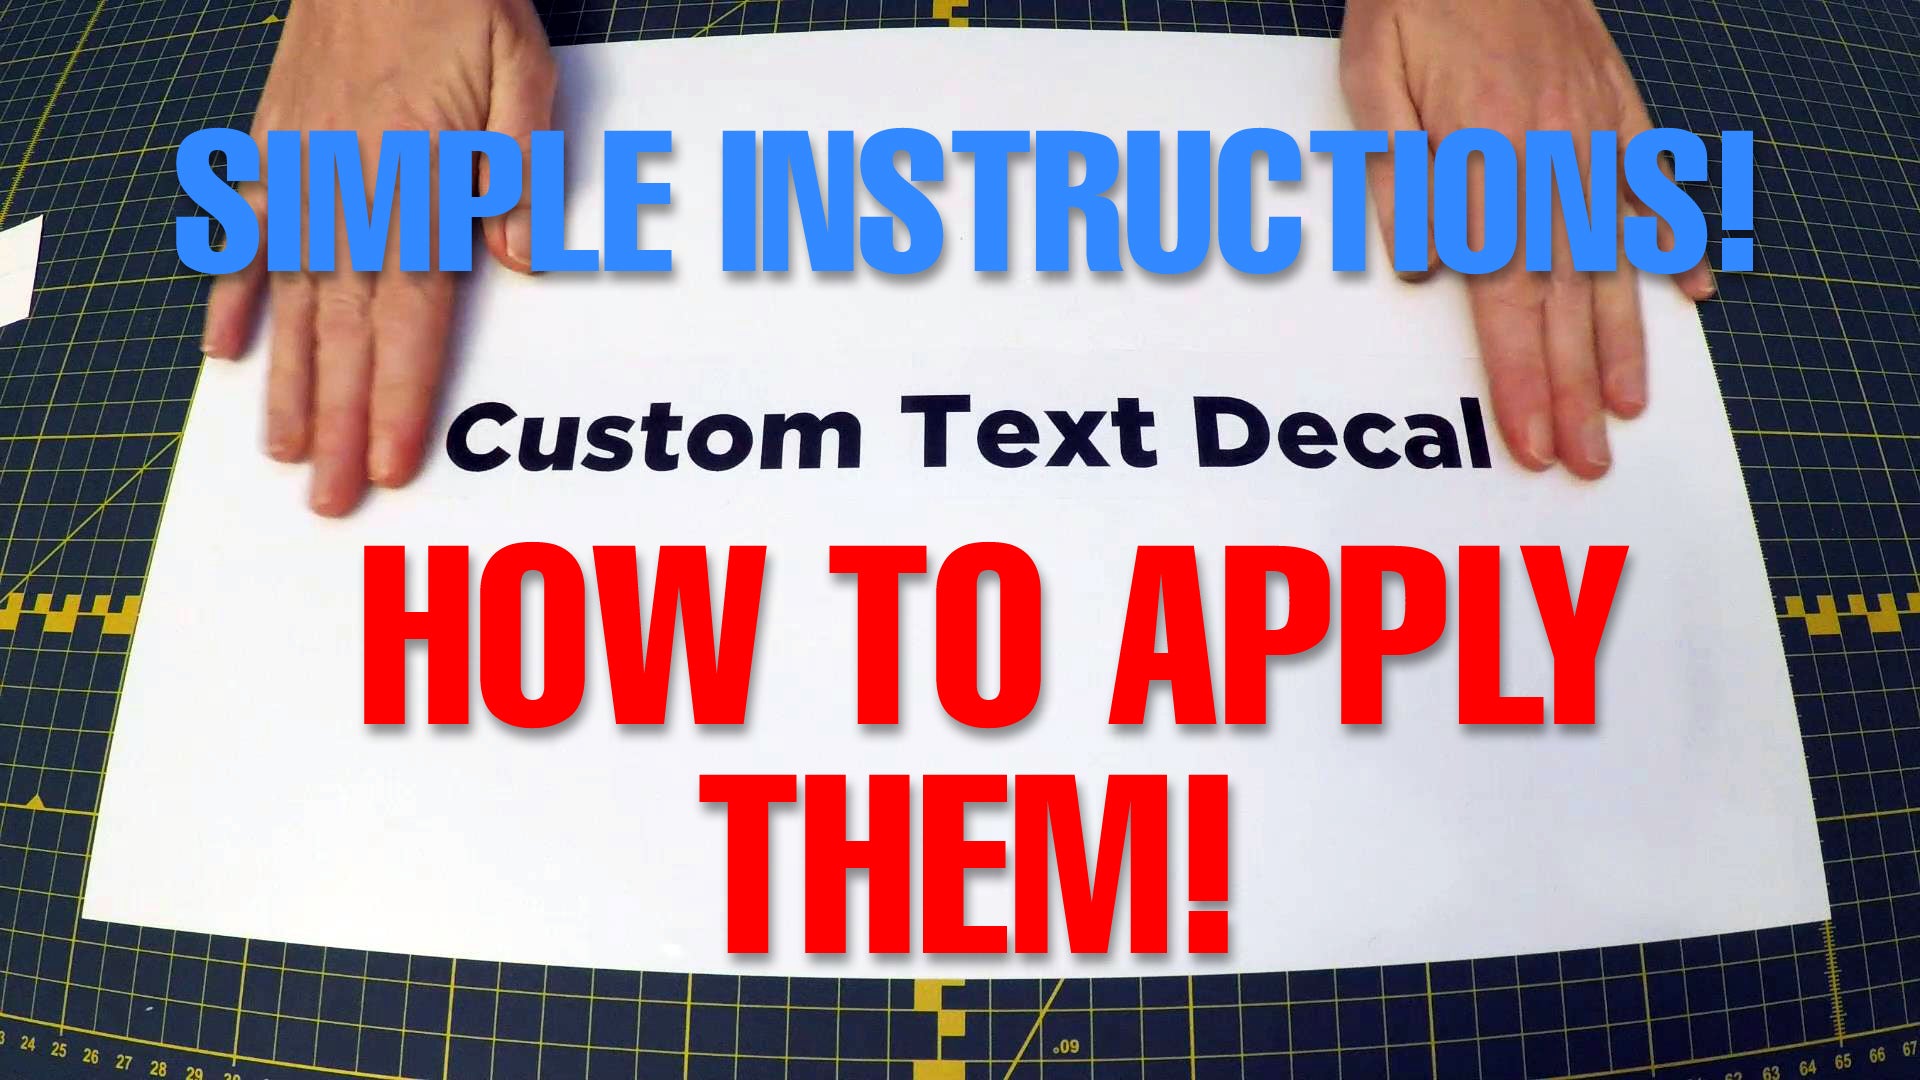 Load video: how to apply custom text decals